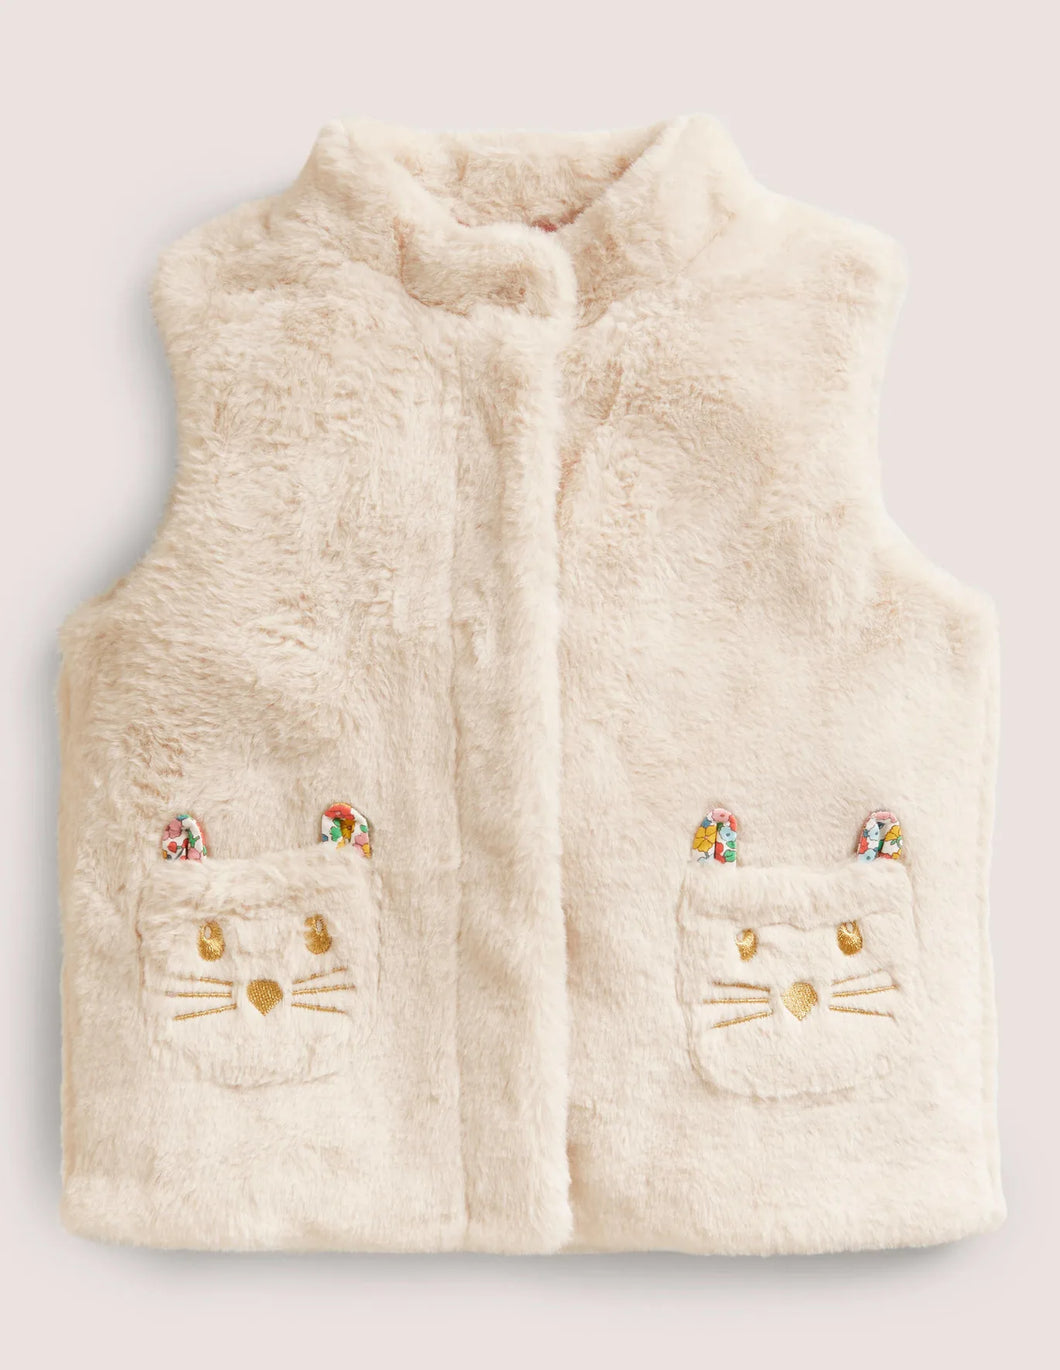 NWT Mini Boden White Faux Fur Gilet with Cat Pockets